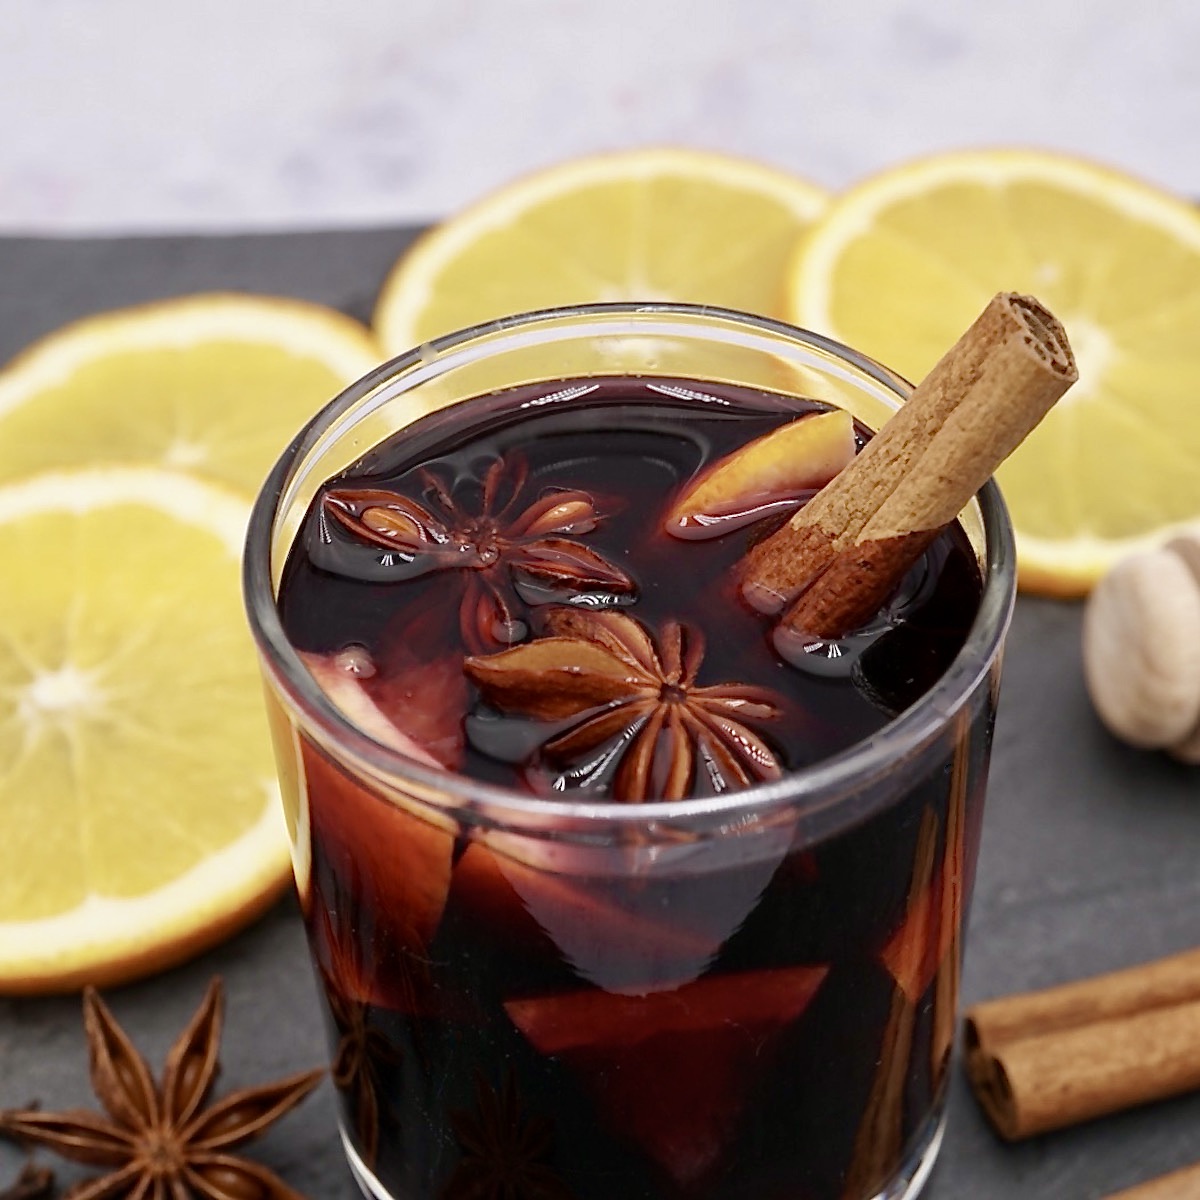 A glass of mulled wine with garnishes